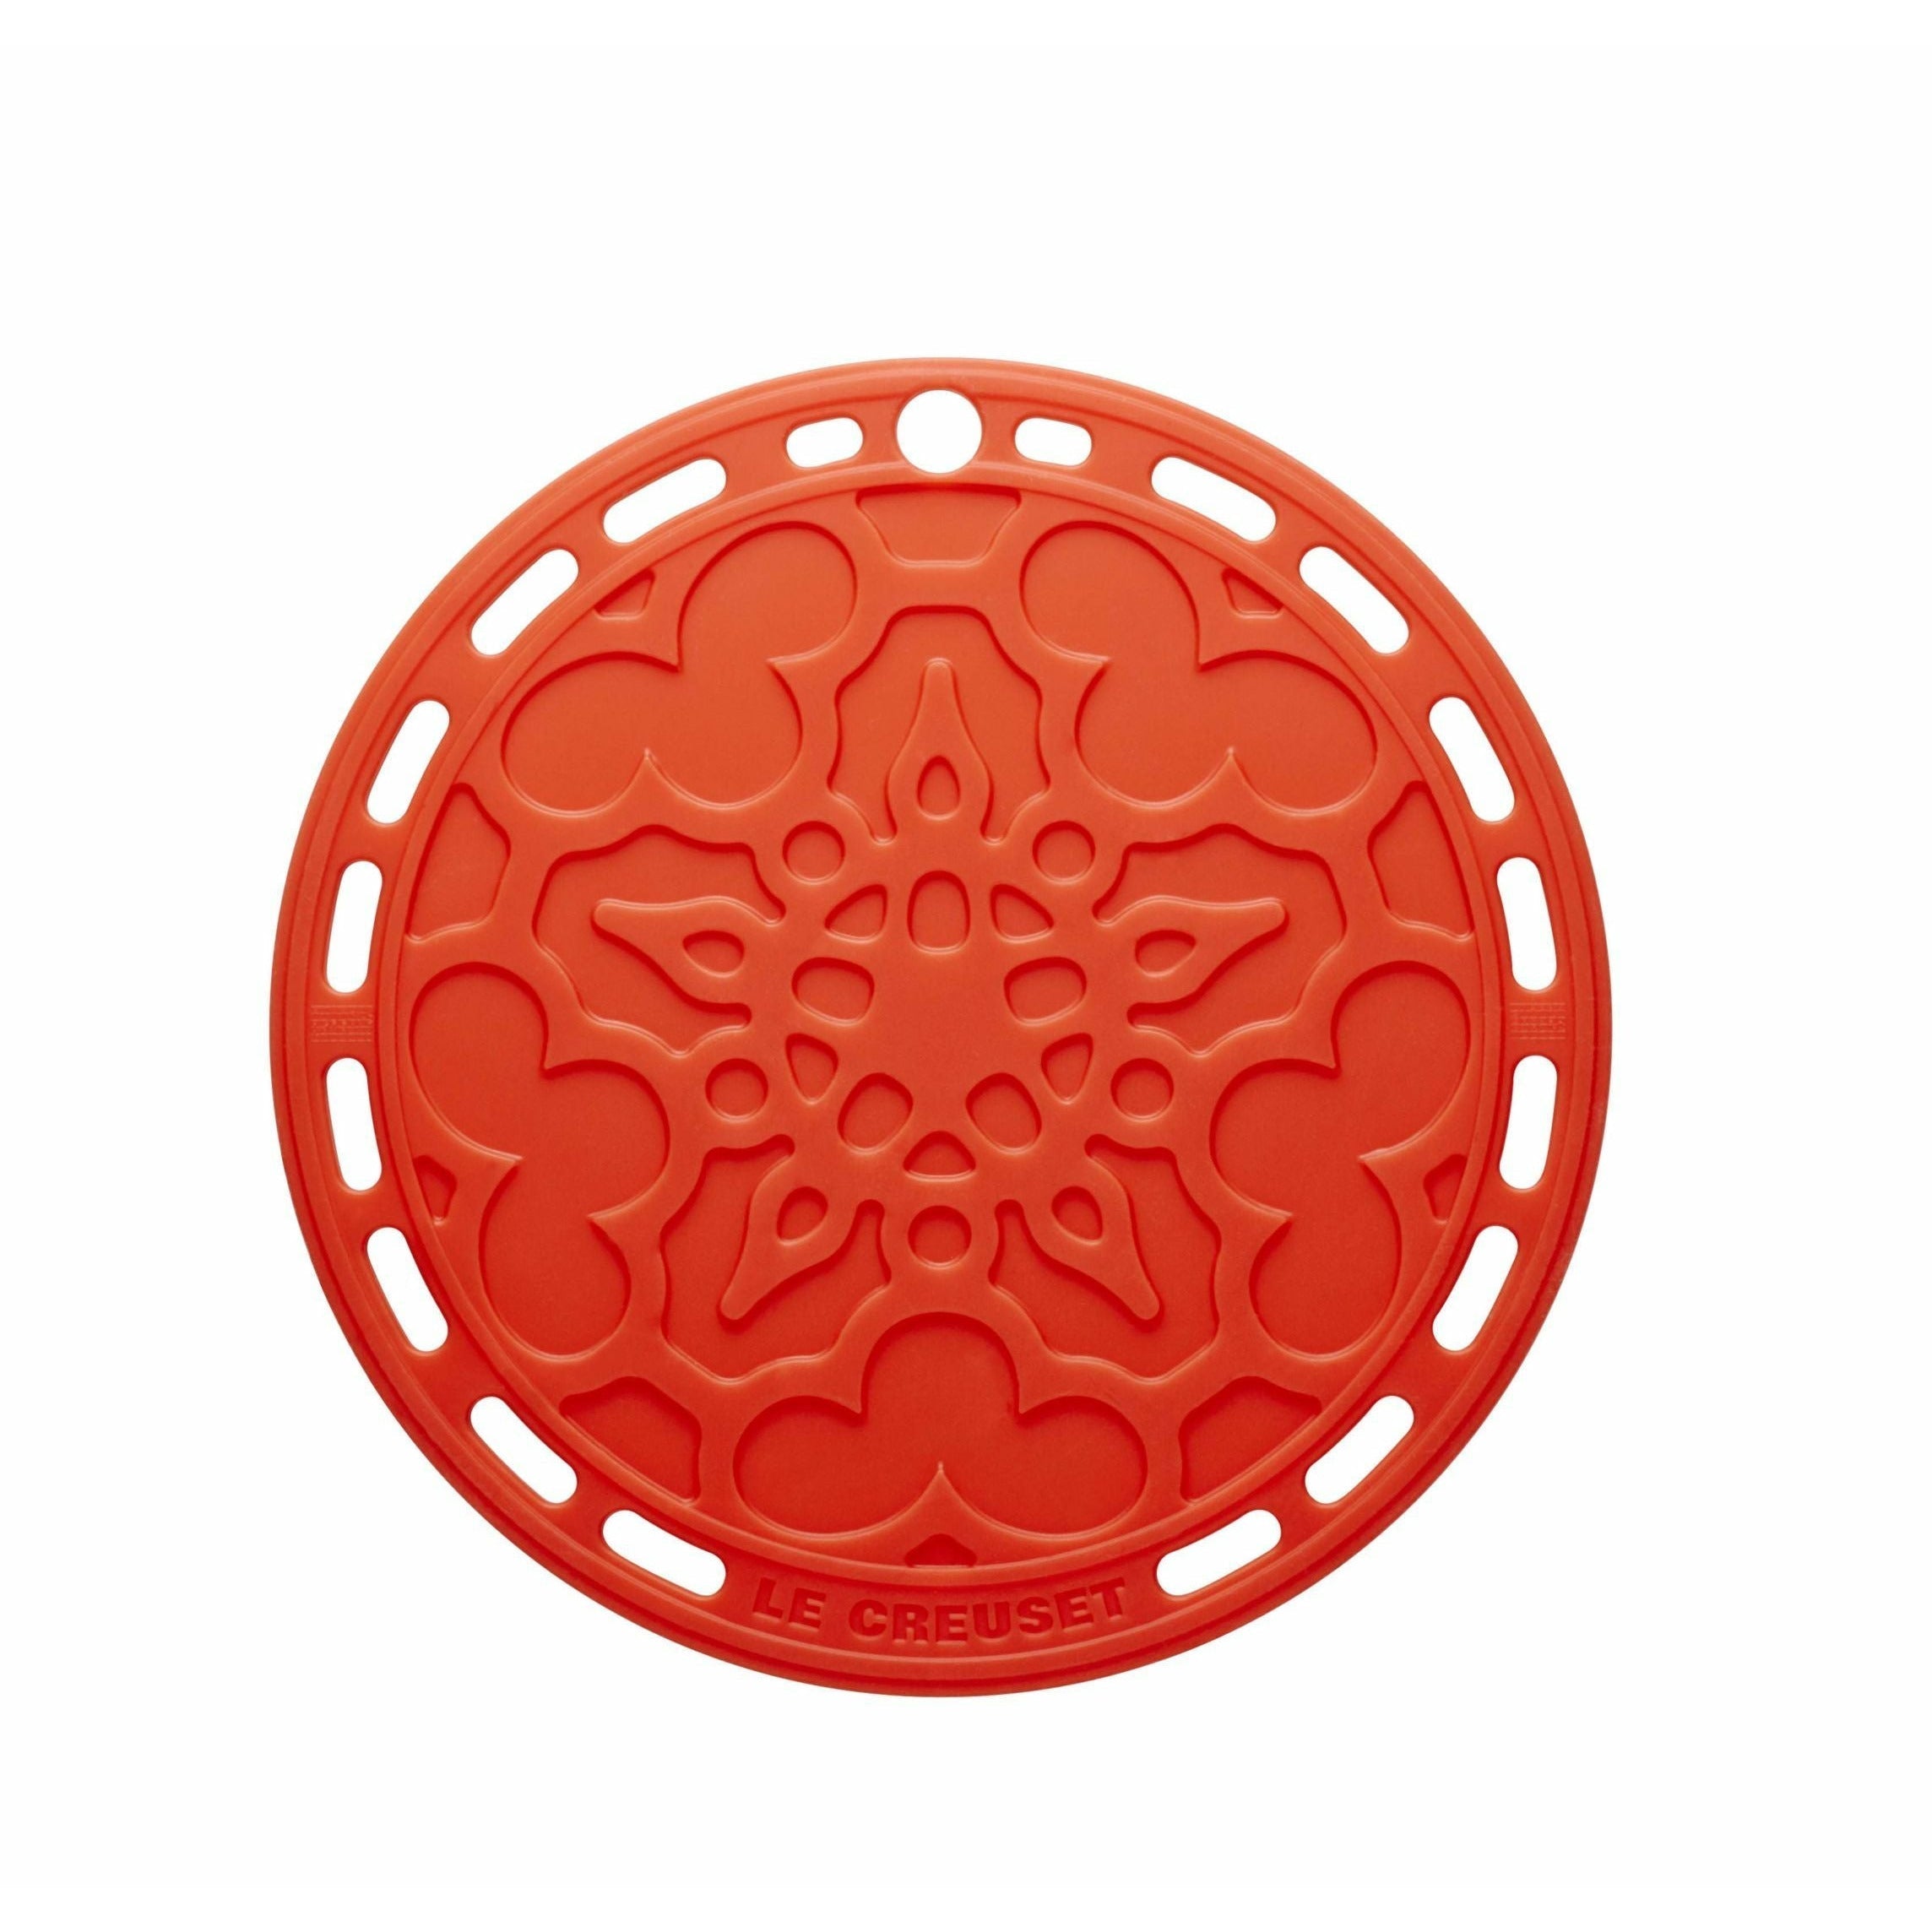 Le Creuset Silicone Coaster Tradition, Oven Red